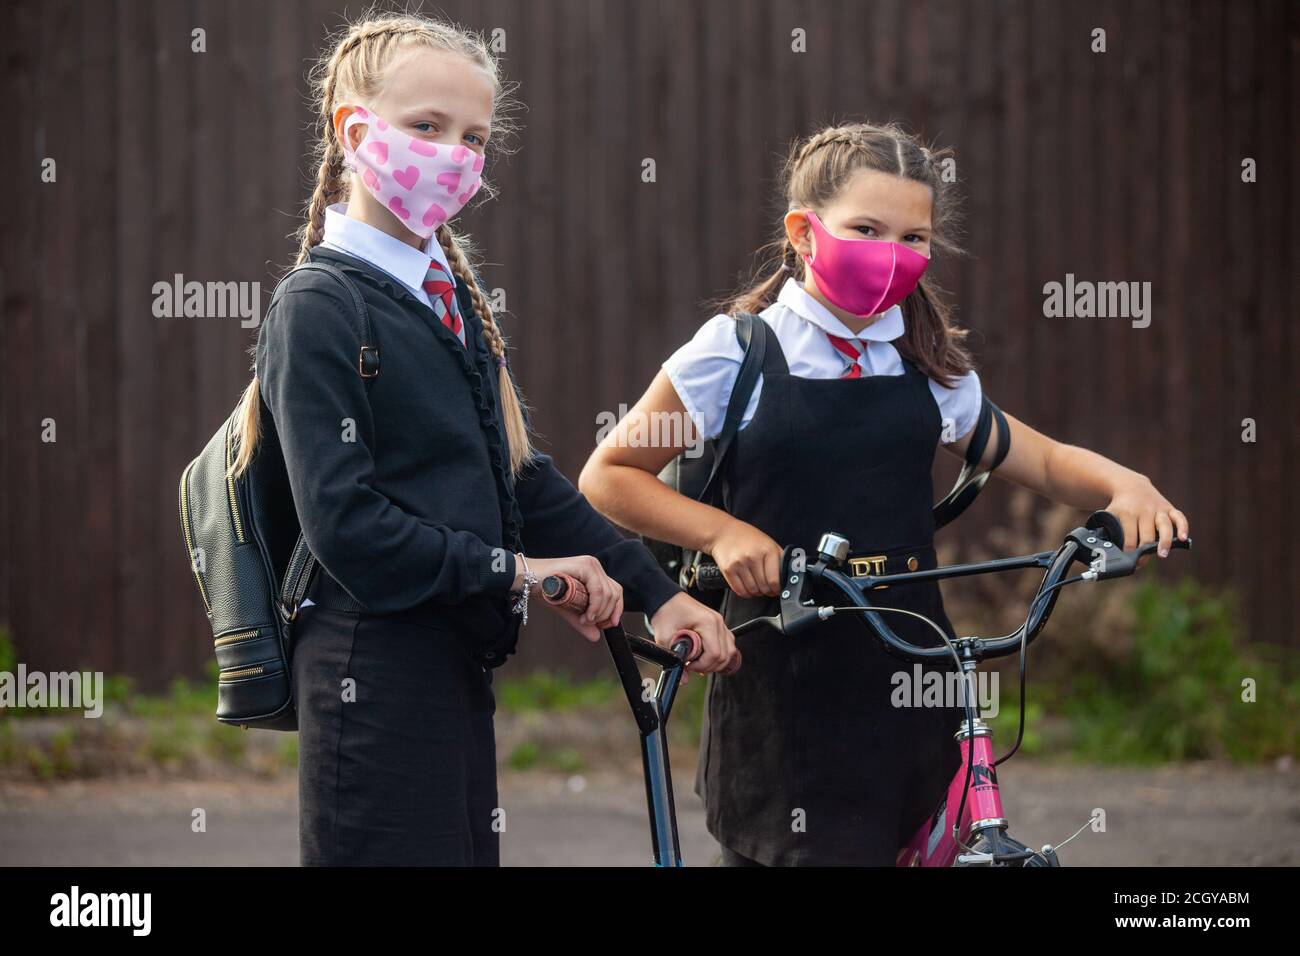 Two 10 year old schoolgirls in school uniform with their scooter and bike and wearing face masks Stock Photo